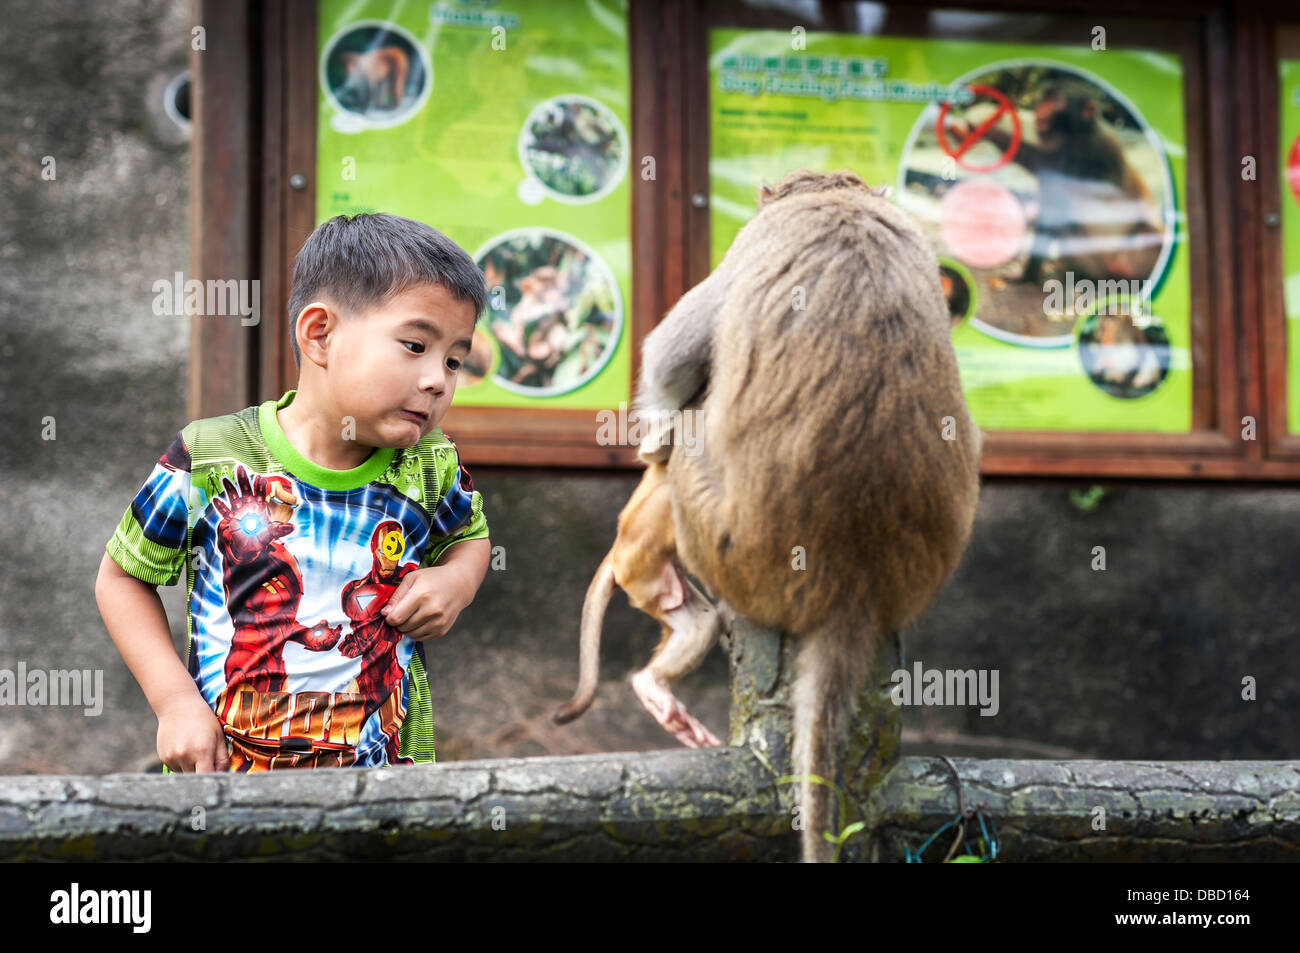 Young boy frightened by wild monkeys, Kam Shan, Hong Kong Stock Photo